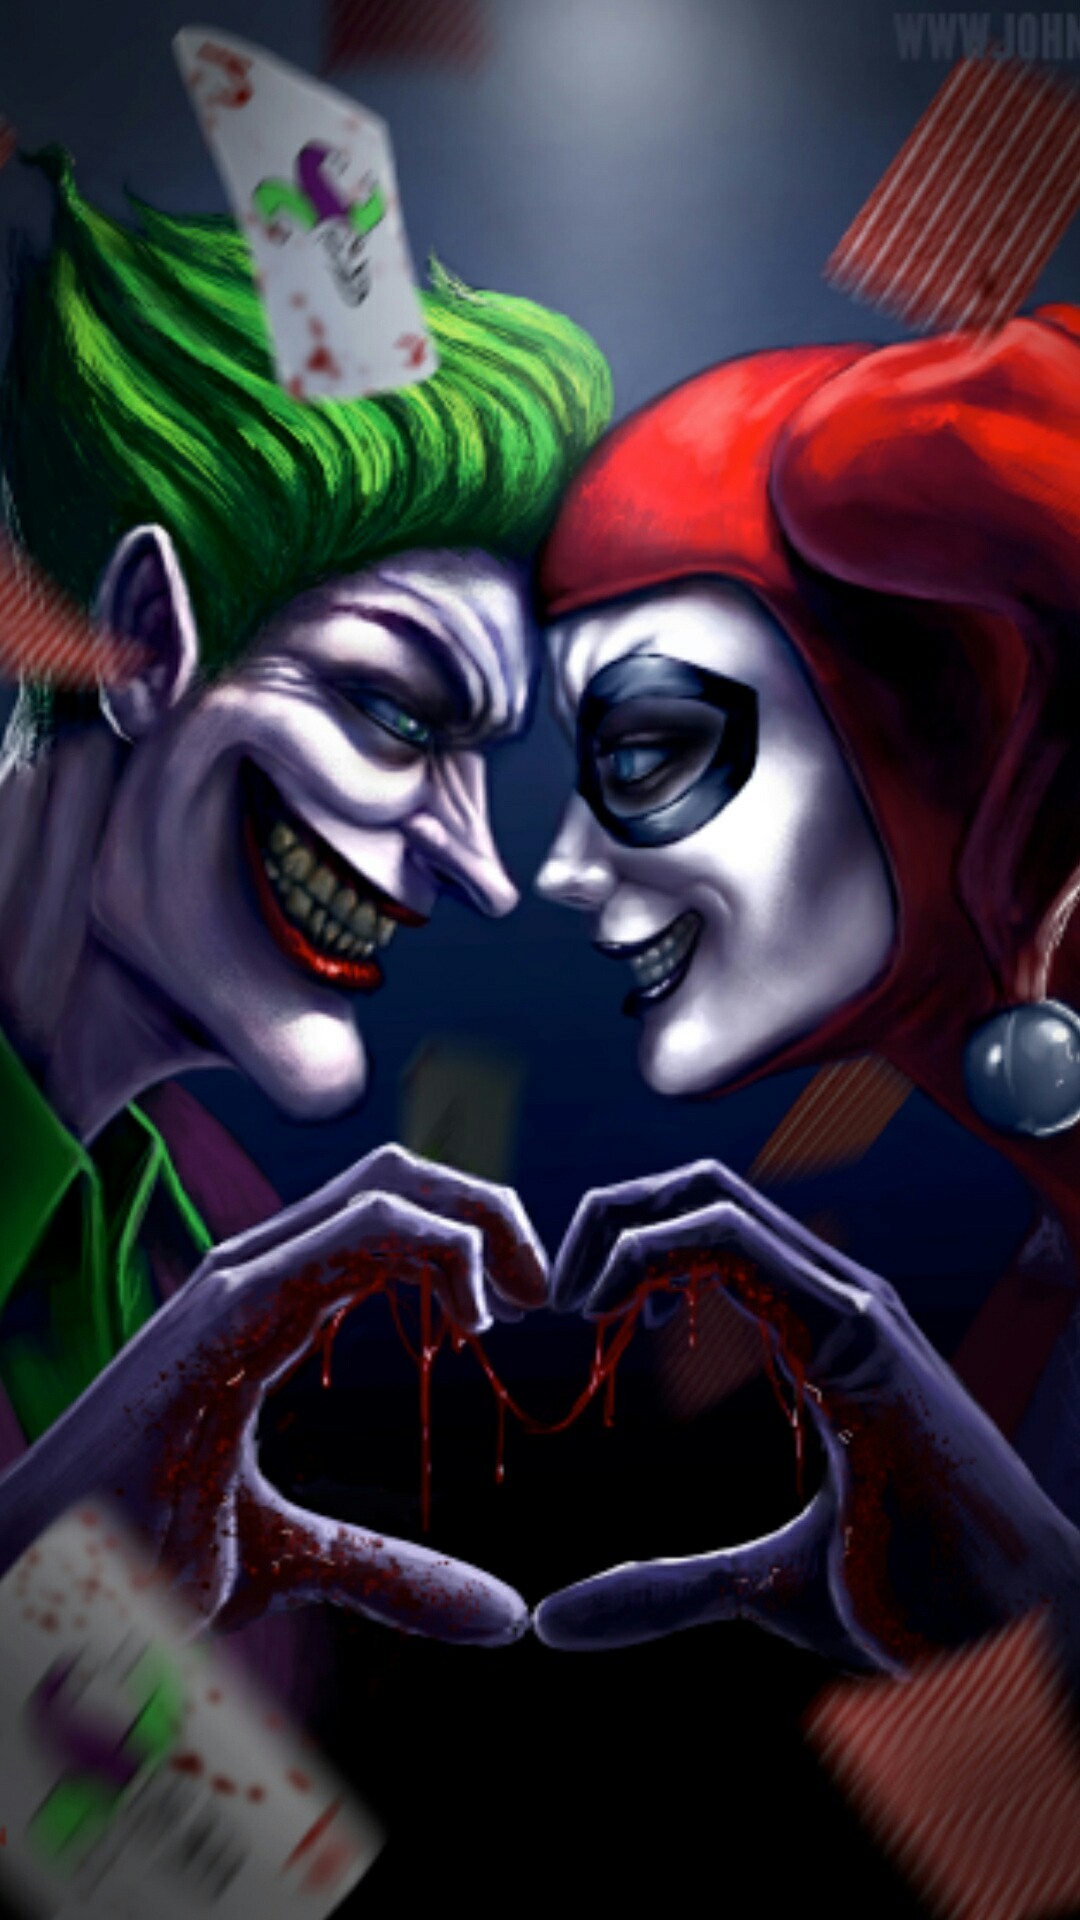 1080x1920 The Joker and Harley Quinn iPhone case